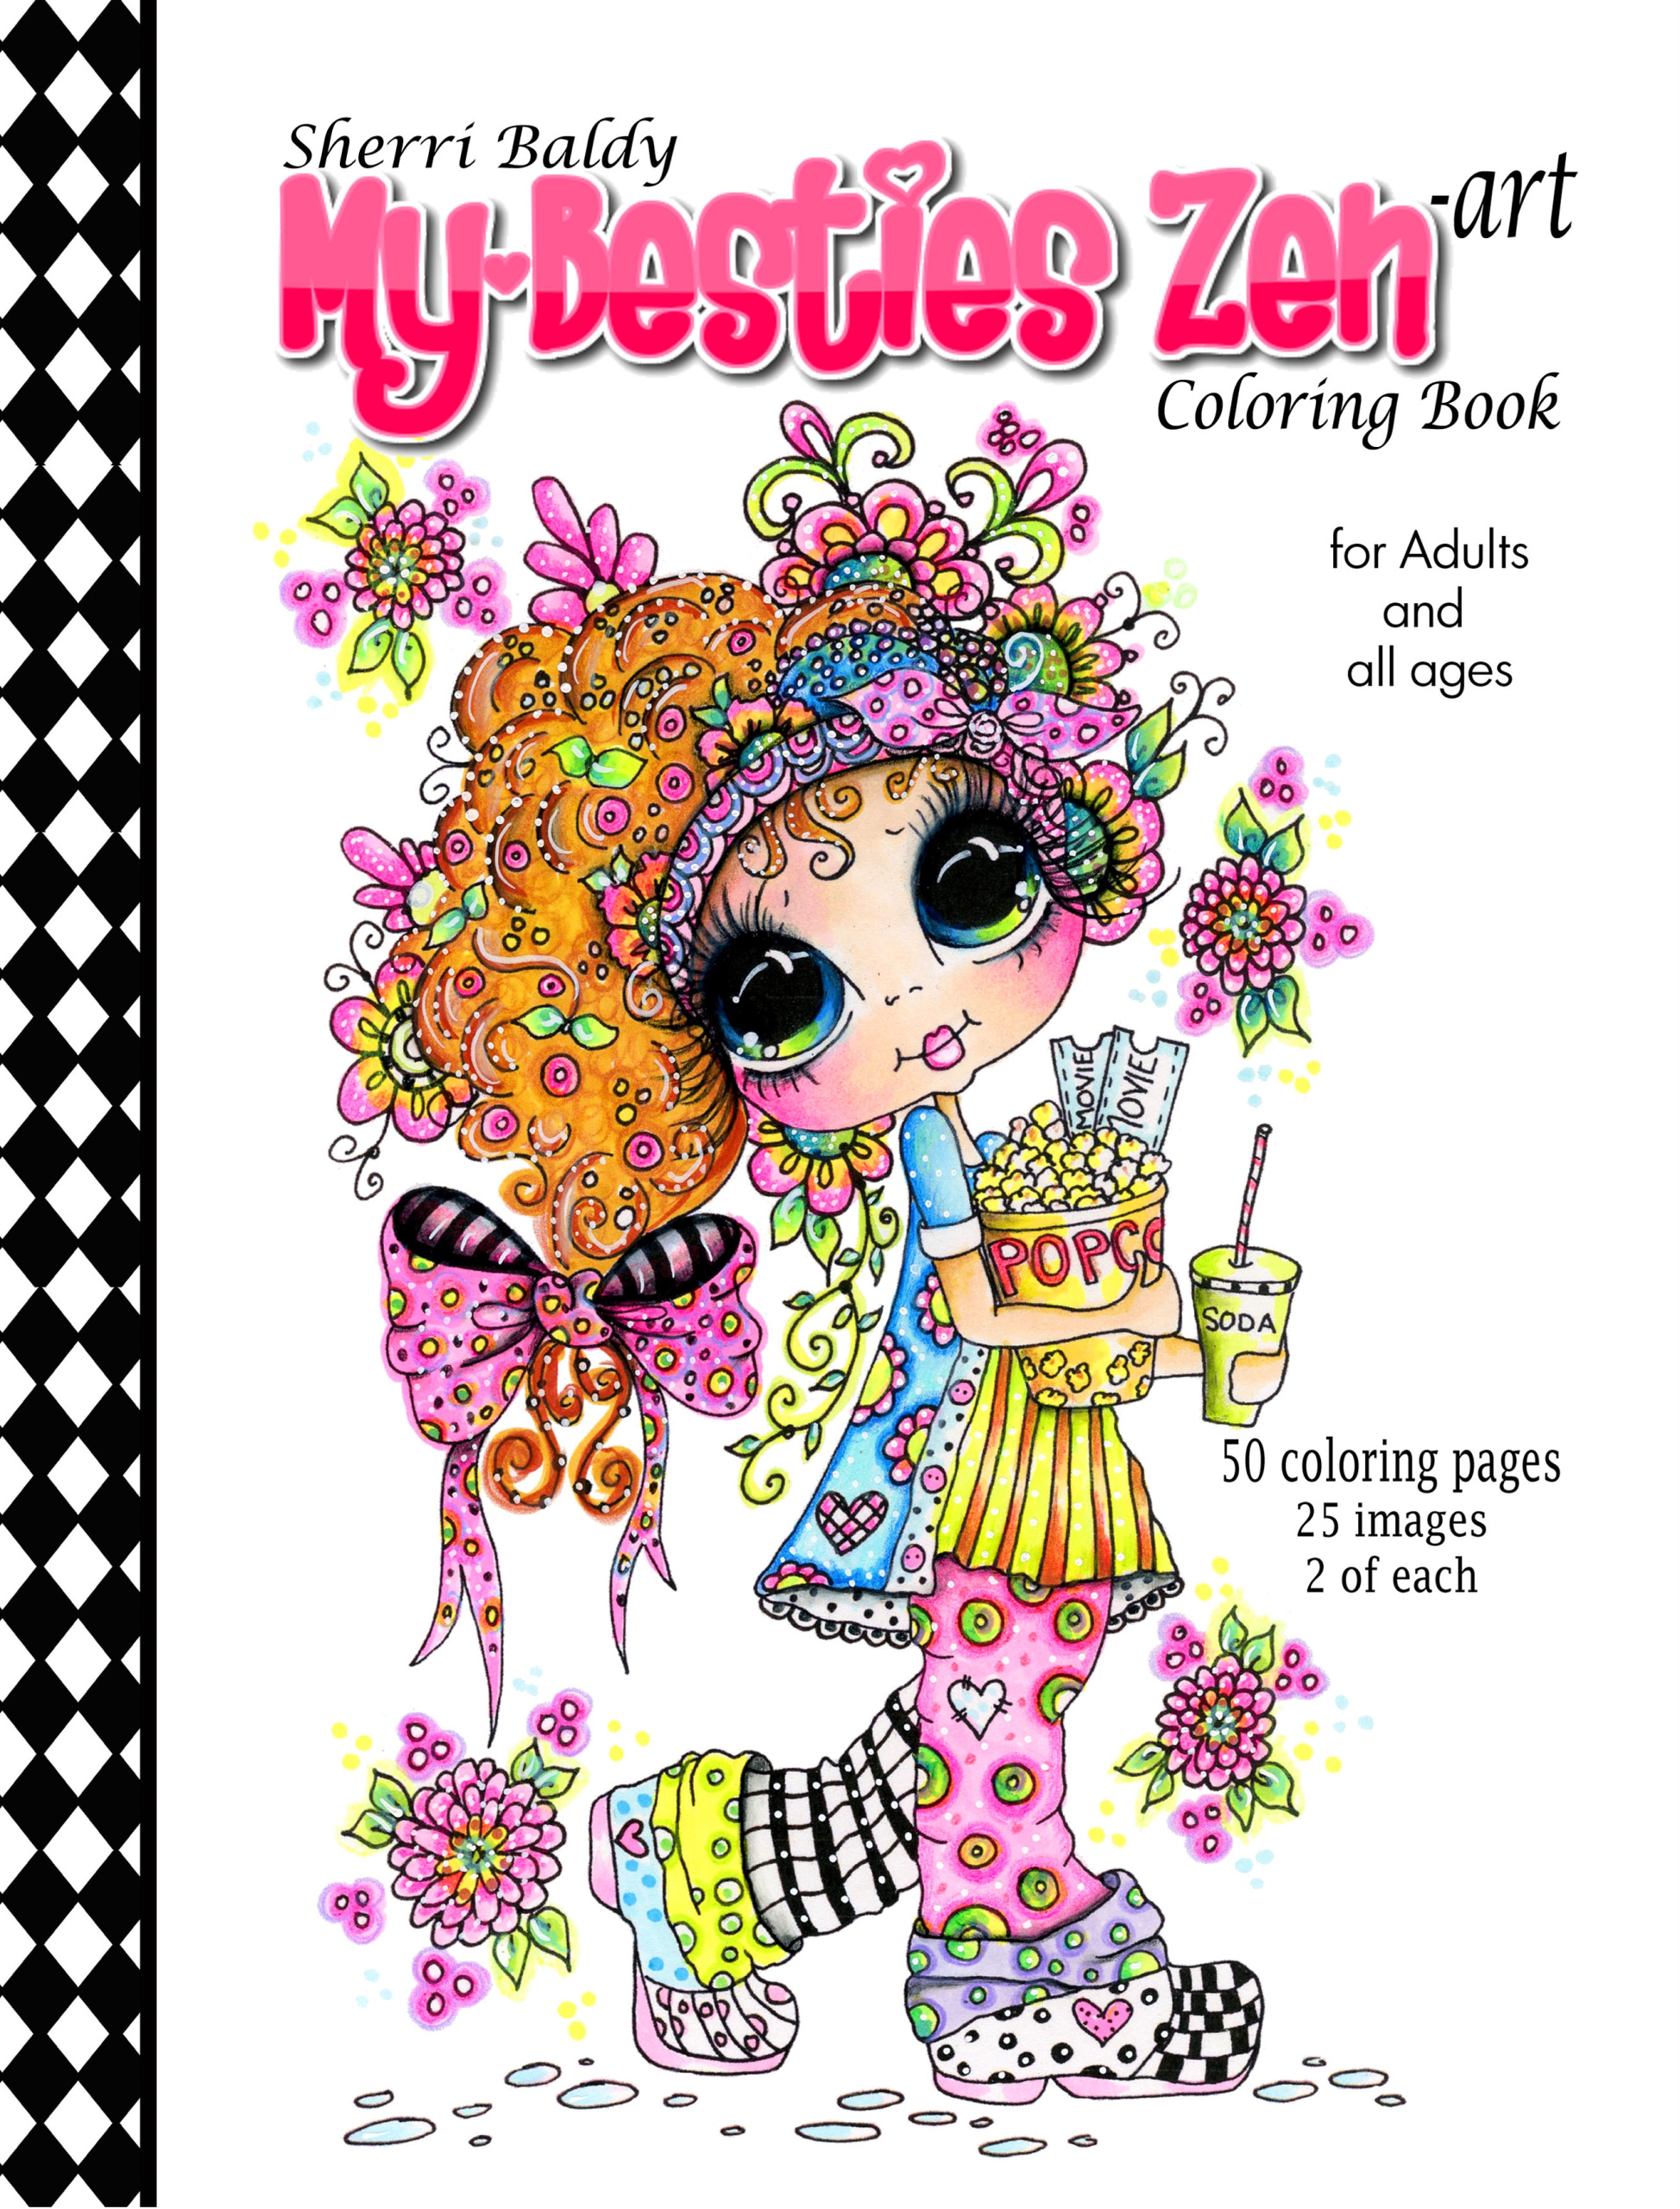 Coloring Books SIGNED COPIES by The Artist! Sherri Baldy My